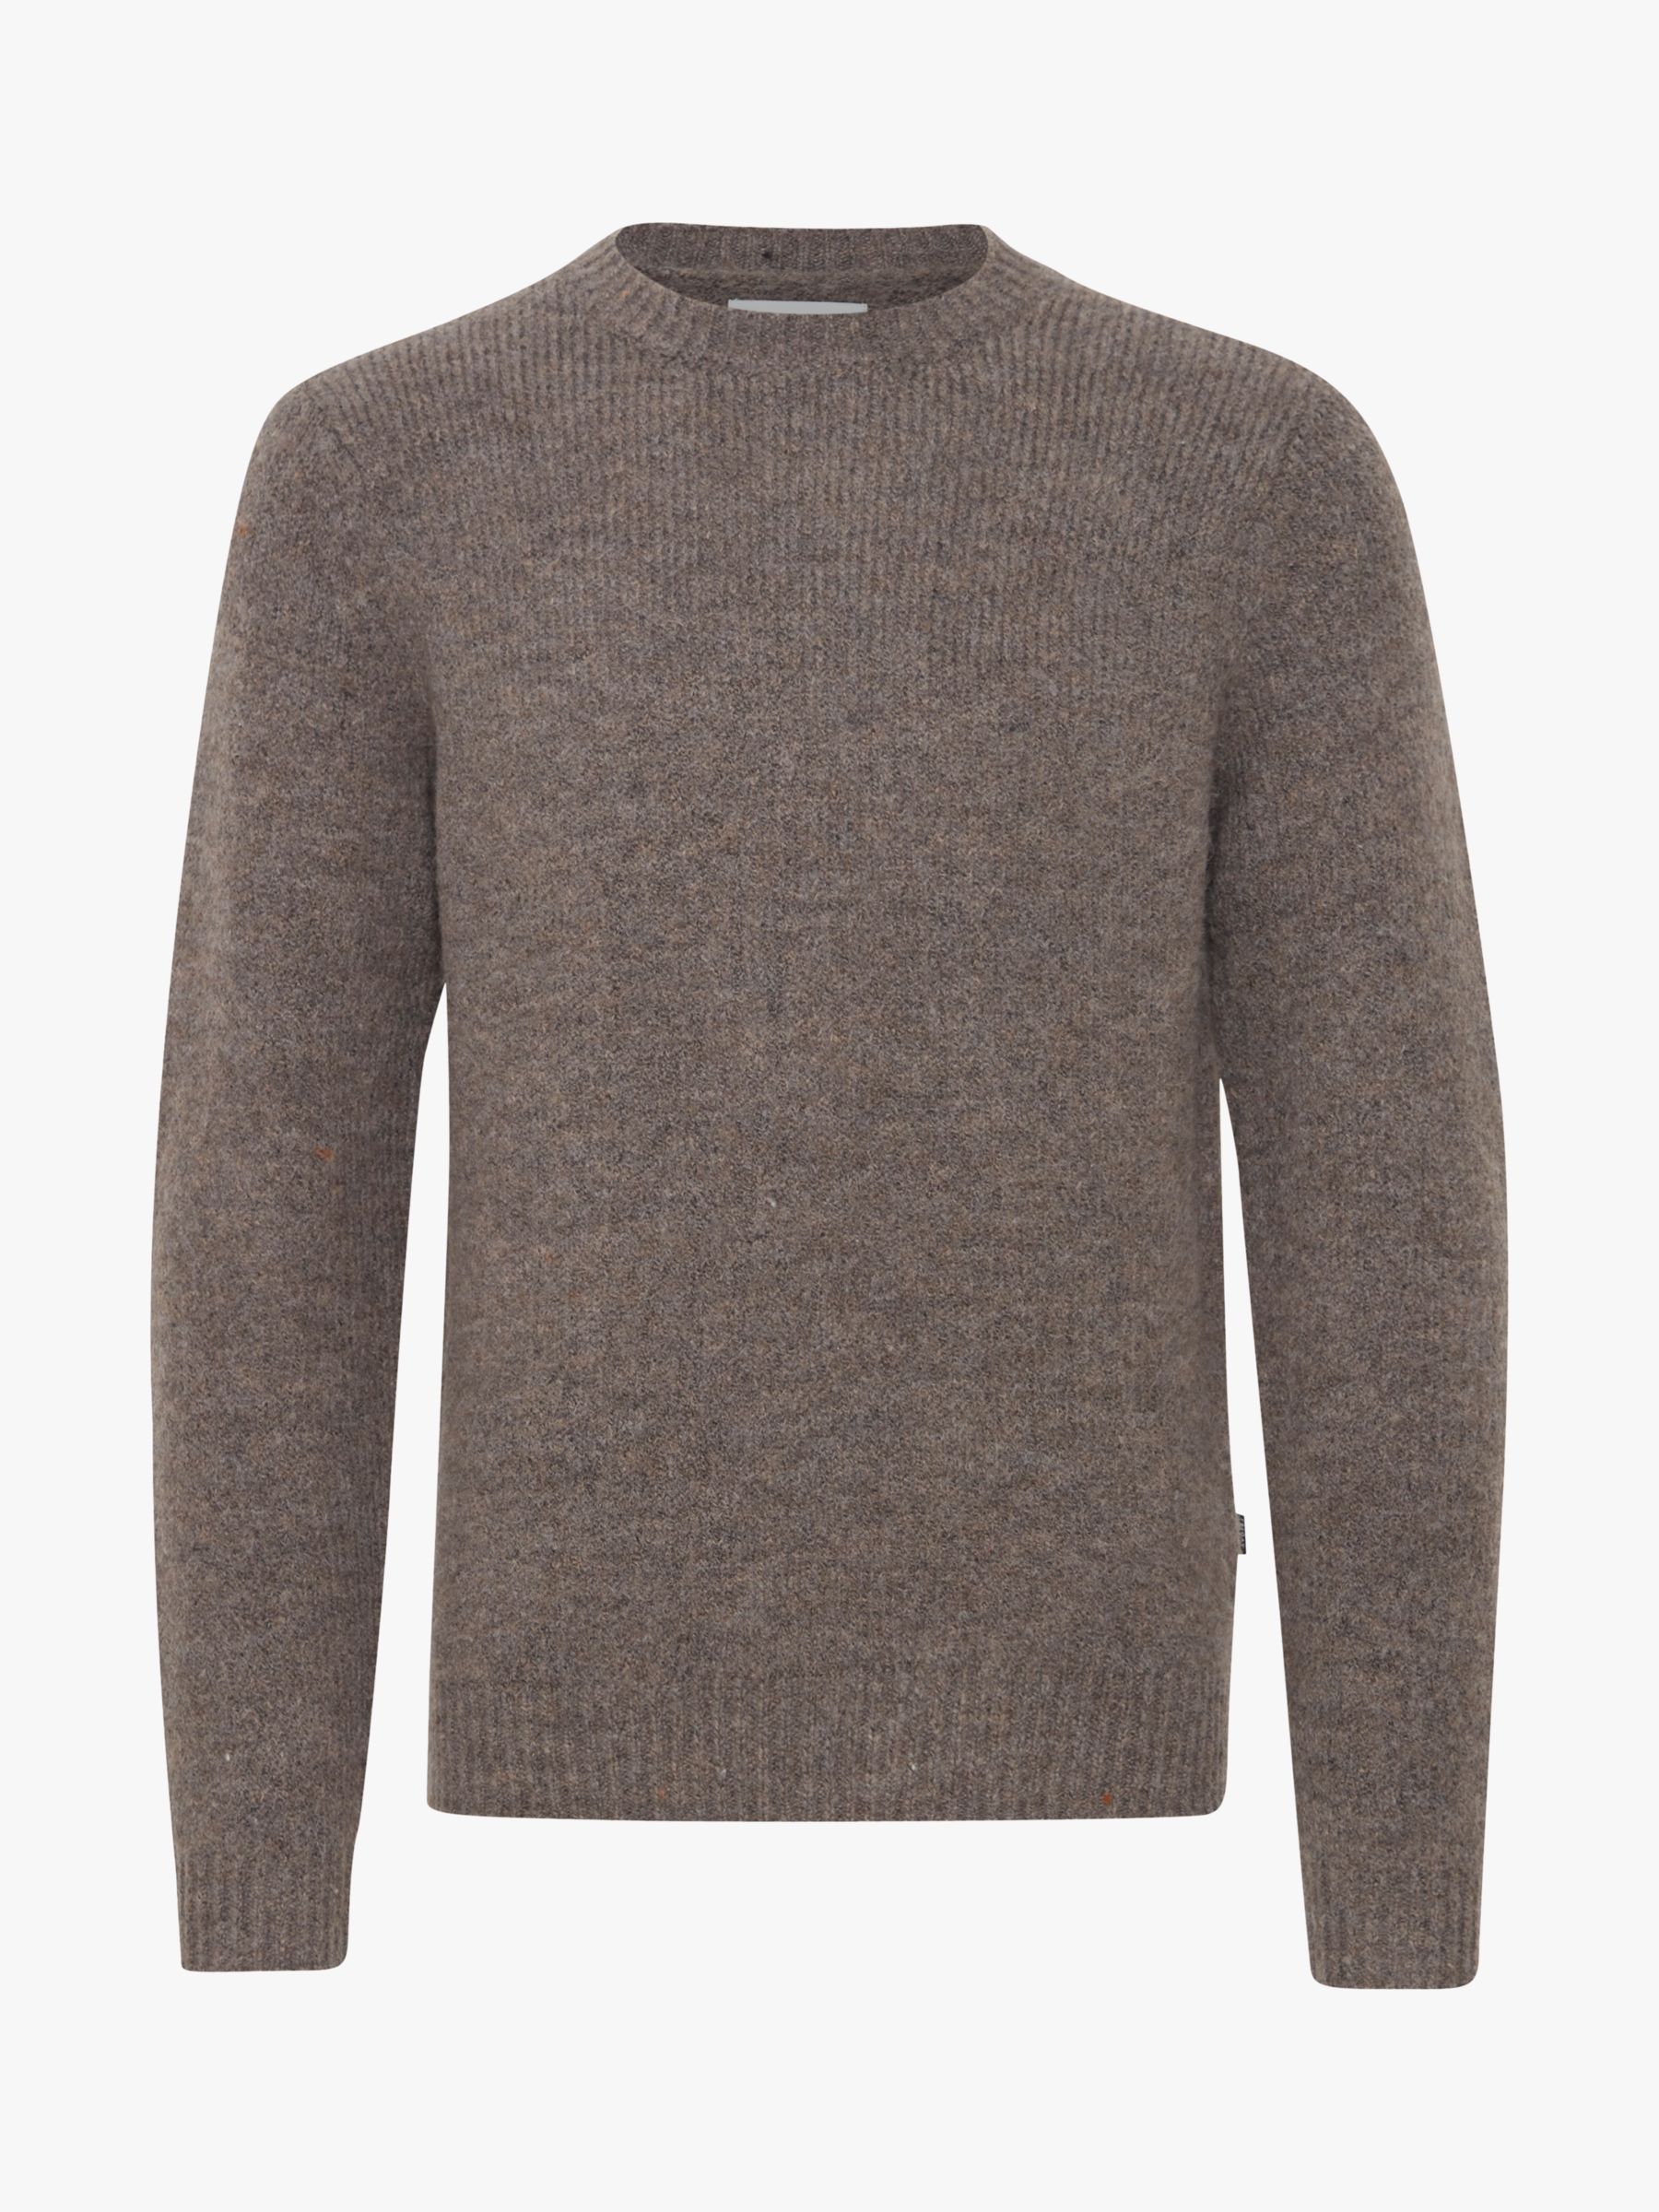 Casual Friday Karl Lambswool Mix Knitted Jumper, Brown, M